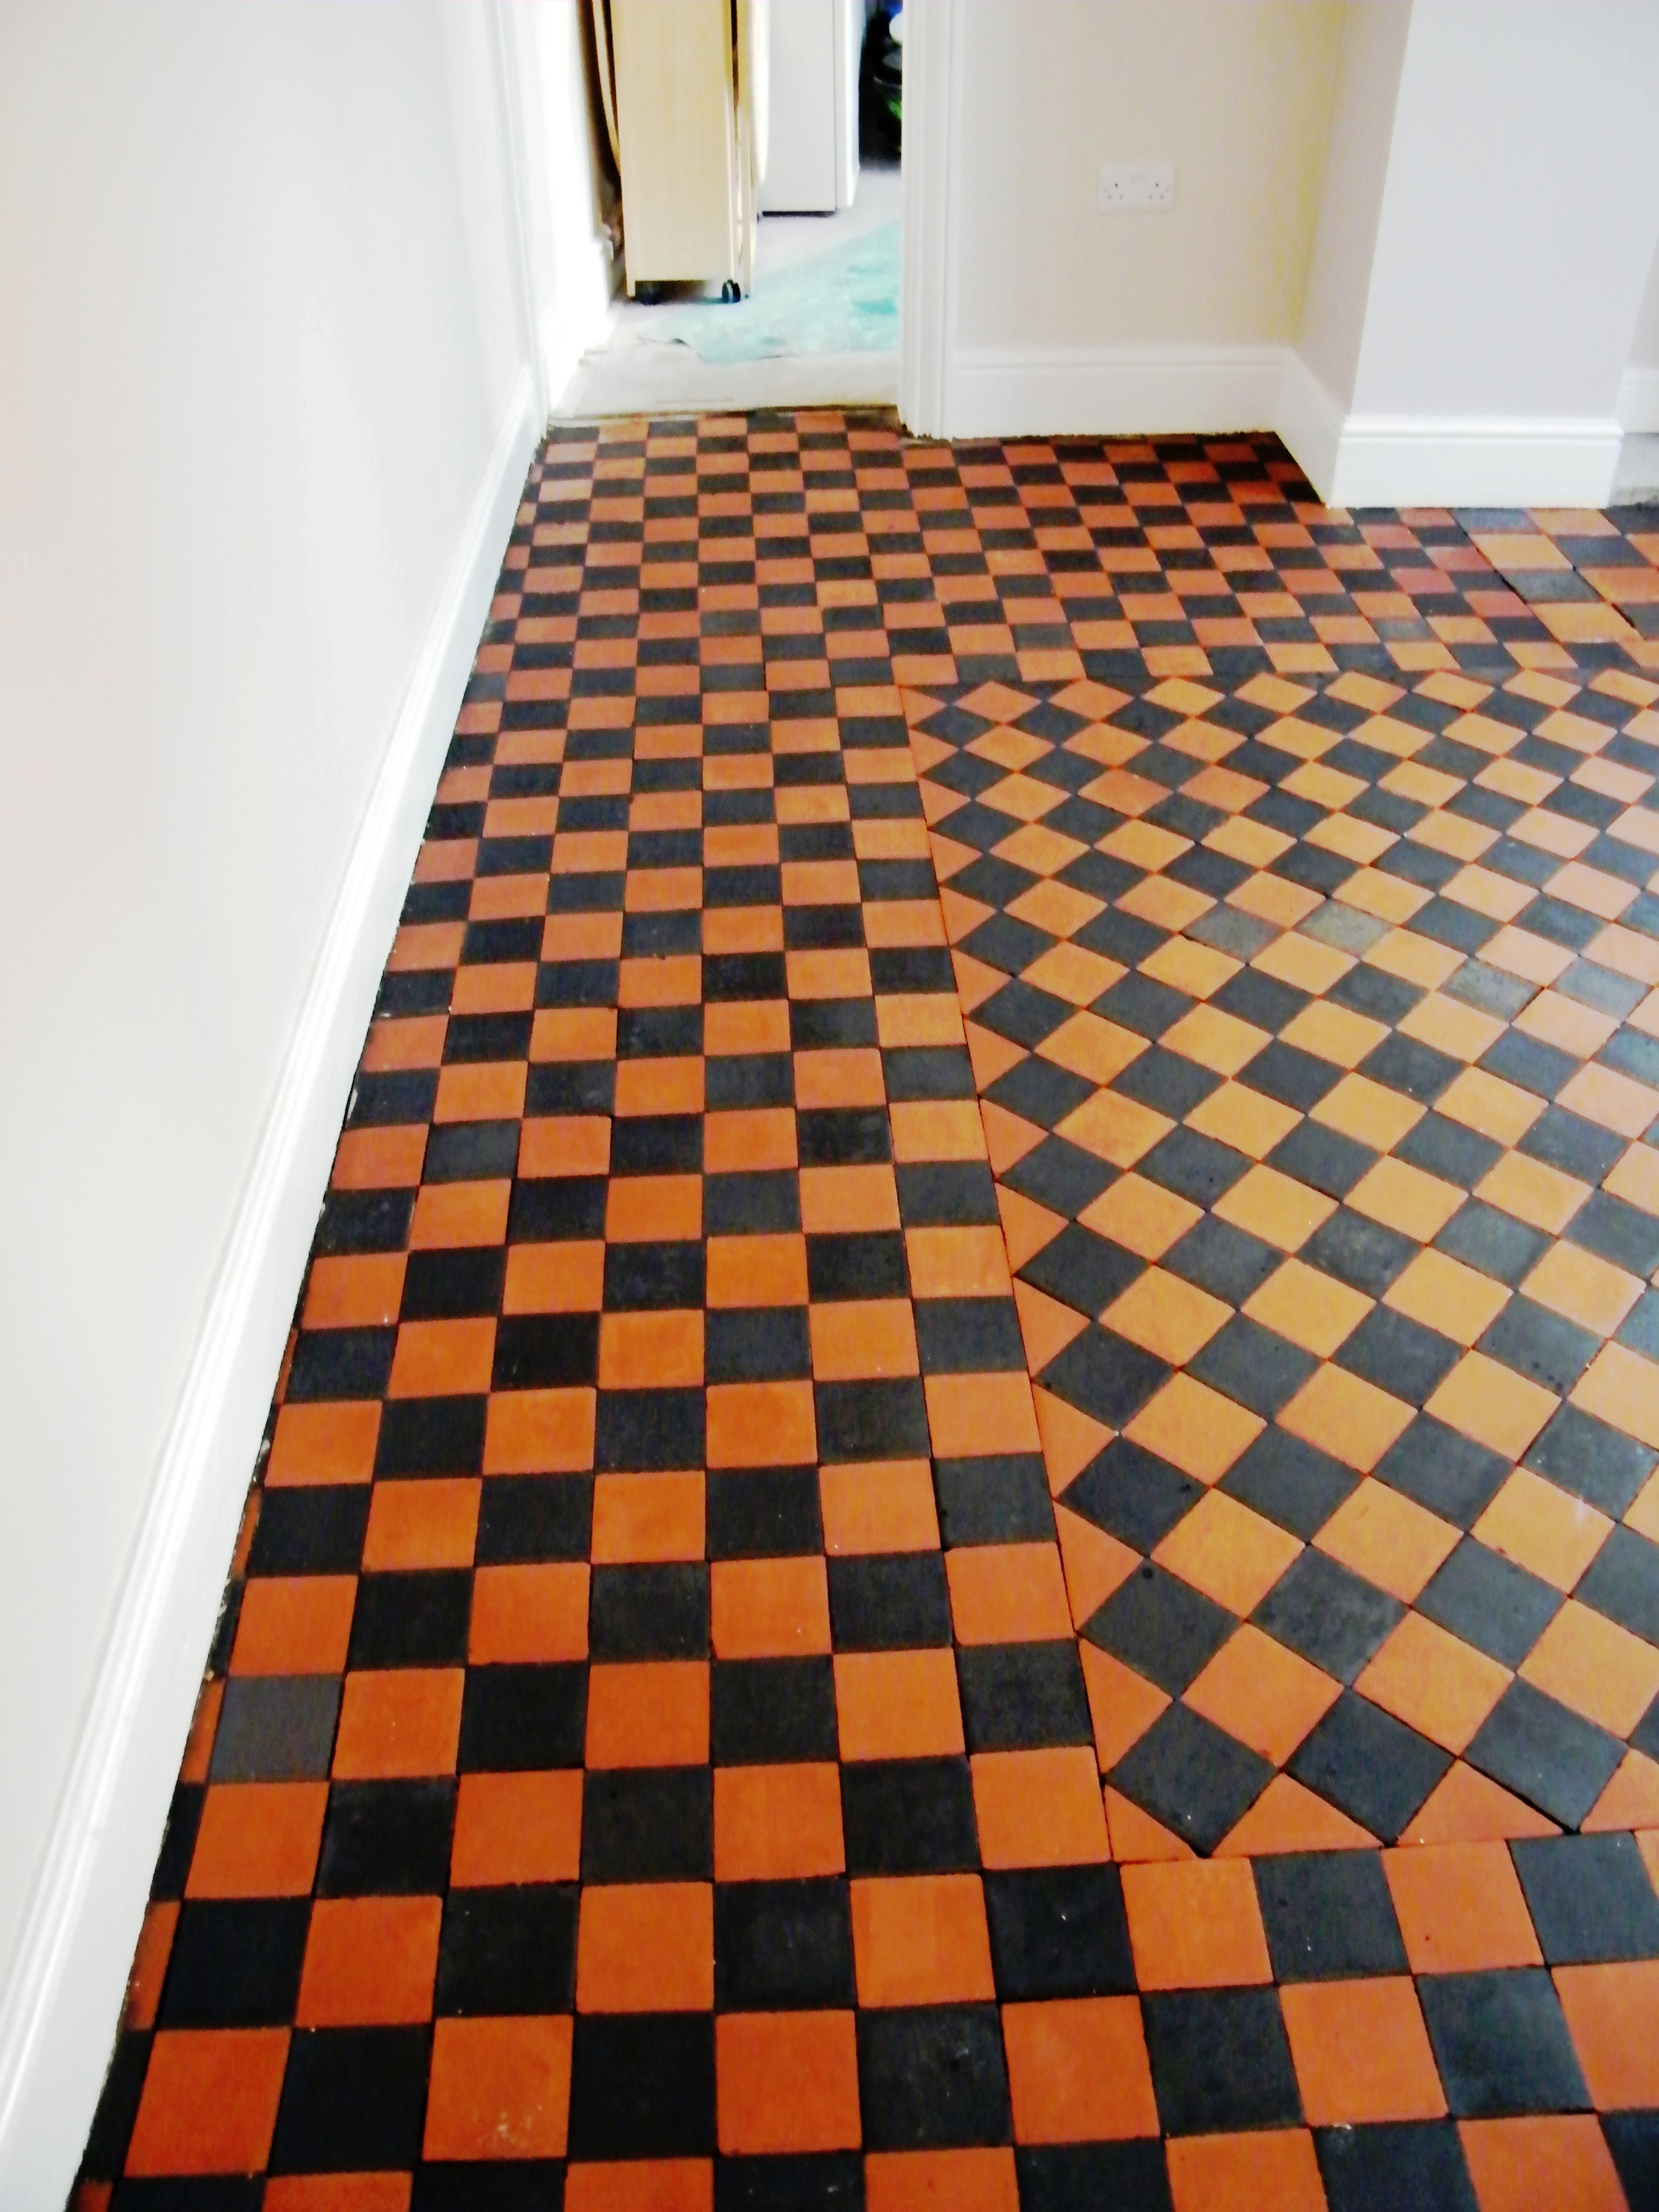 Quarry tile floor cleaning and sealing in Matlock, Derbyshire - Tile ...